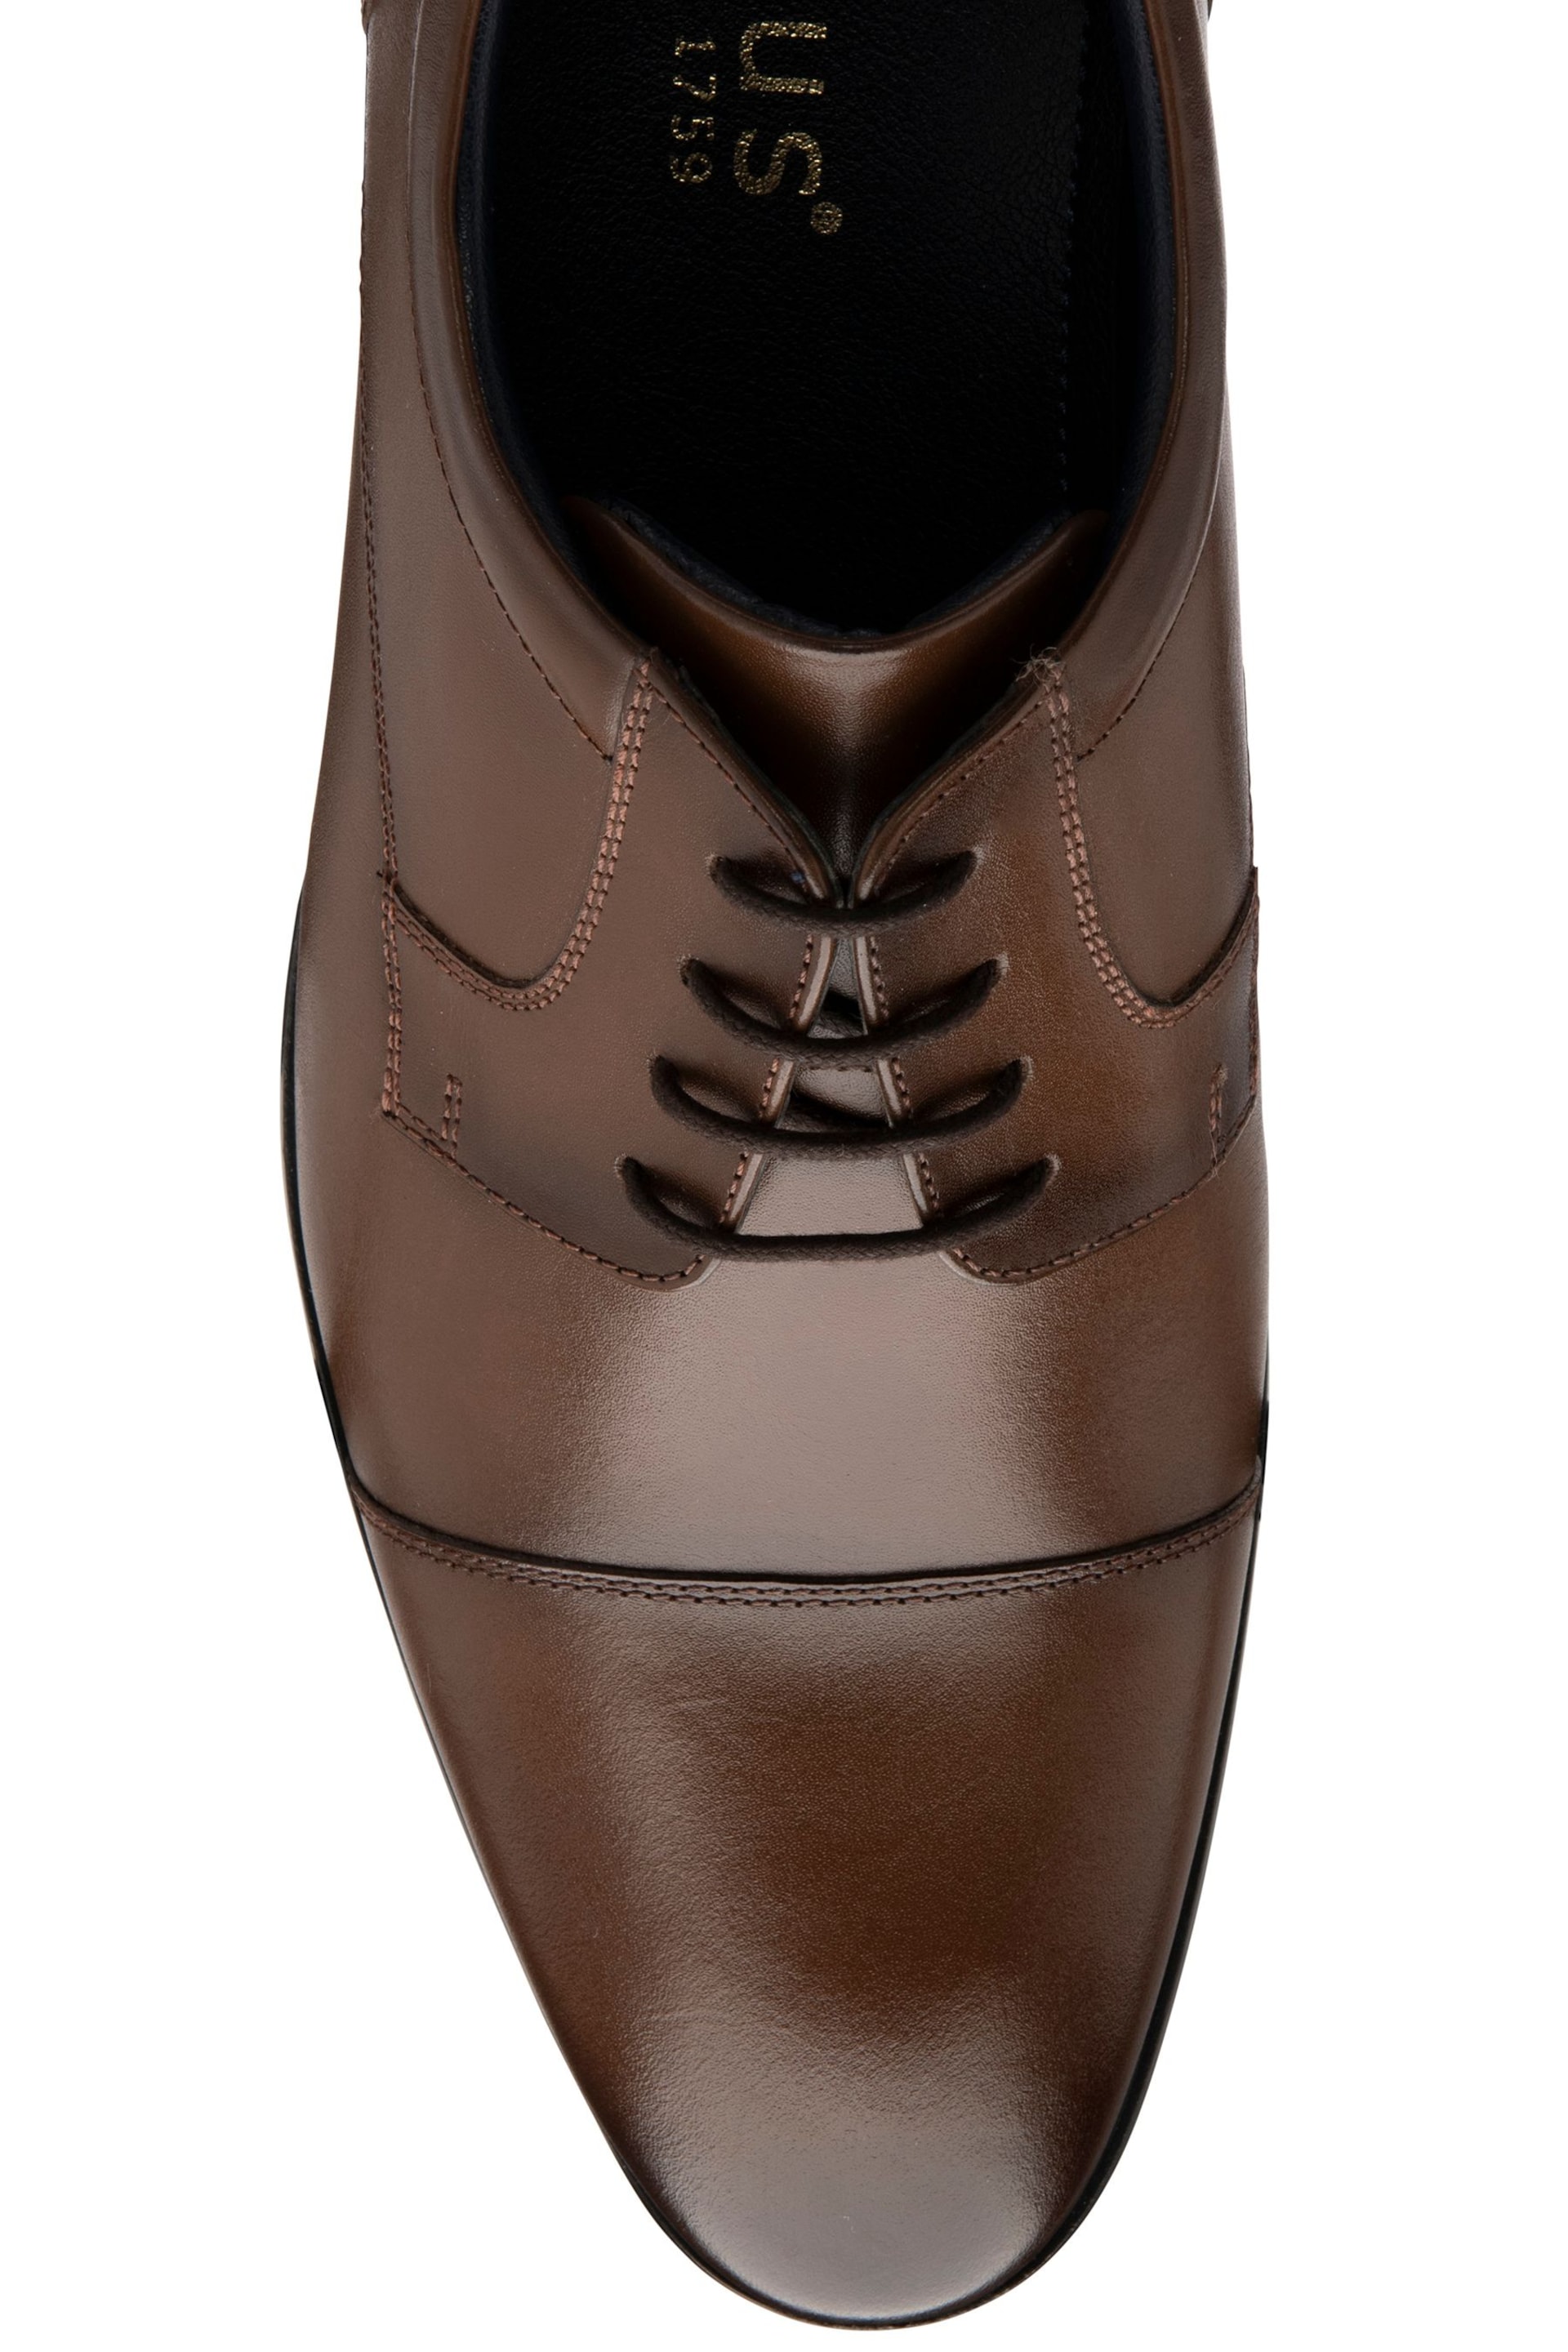 Lotus Brown Leather Oxford Shoes - Image 4 of 4